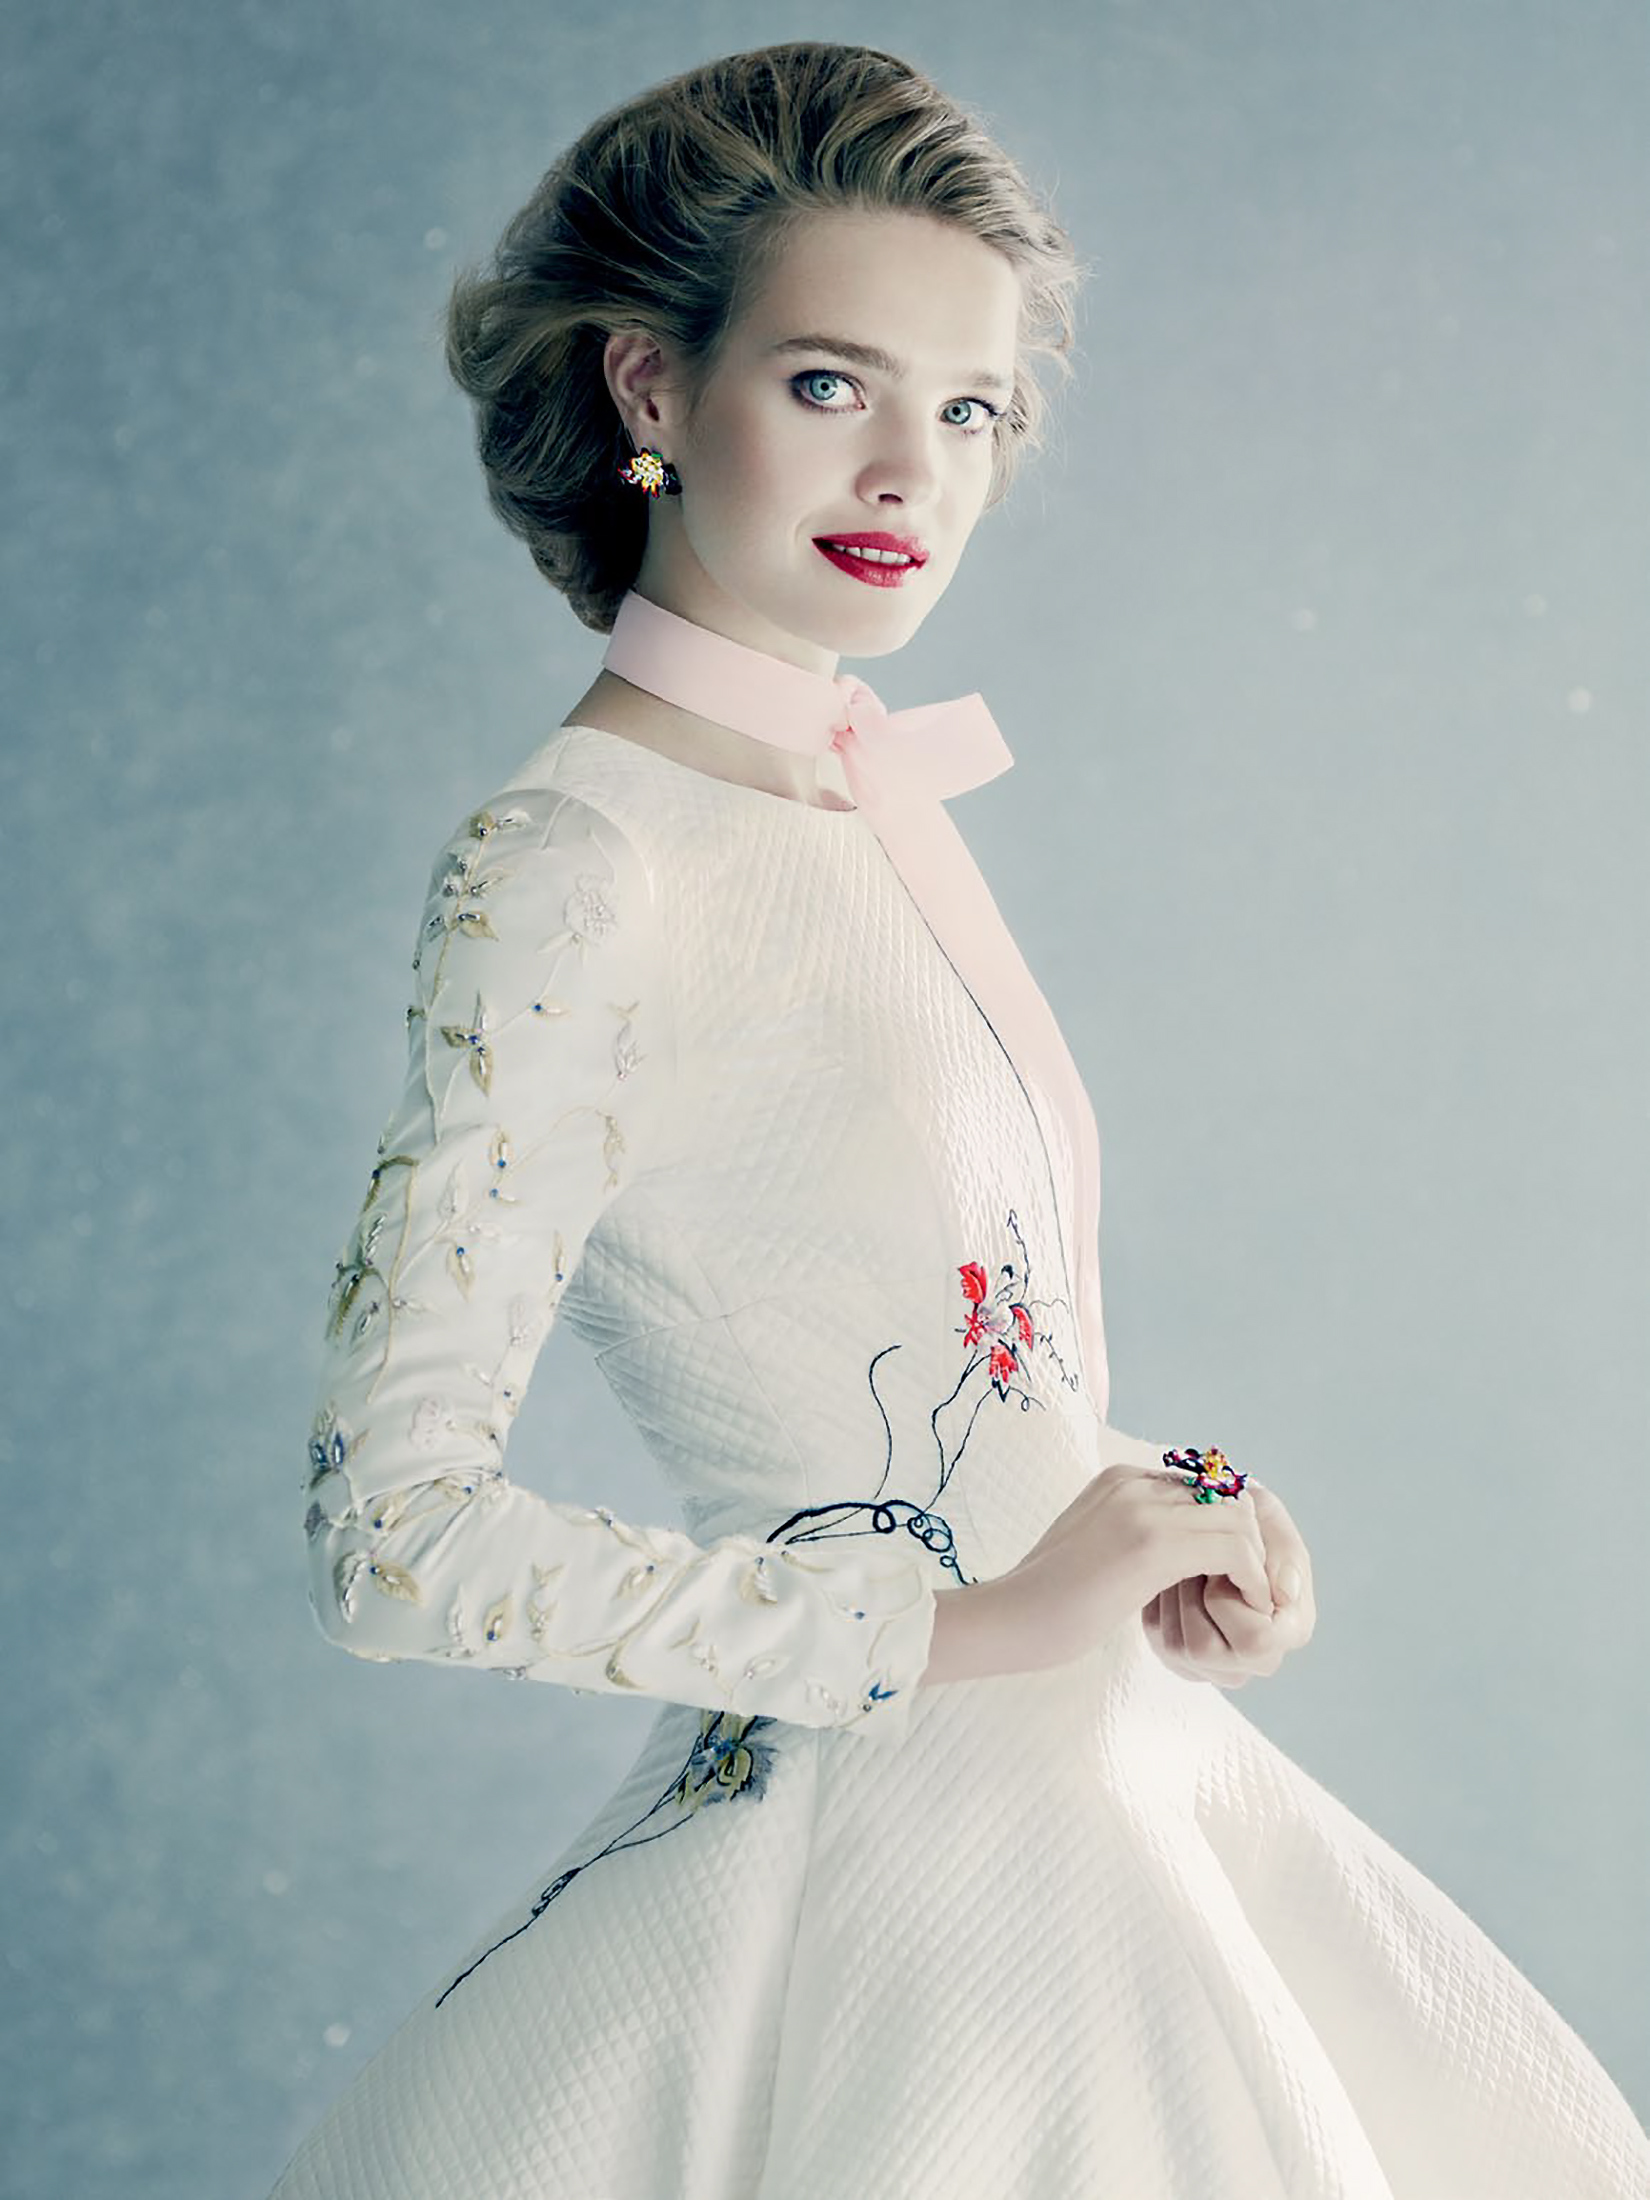 natalia-vodianova-by-paolo-roversi-for-vogue-russia-december-20147.jpg